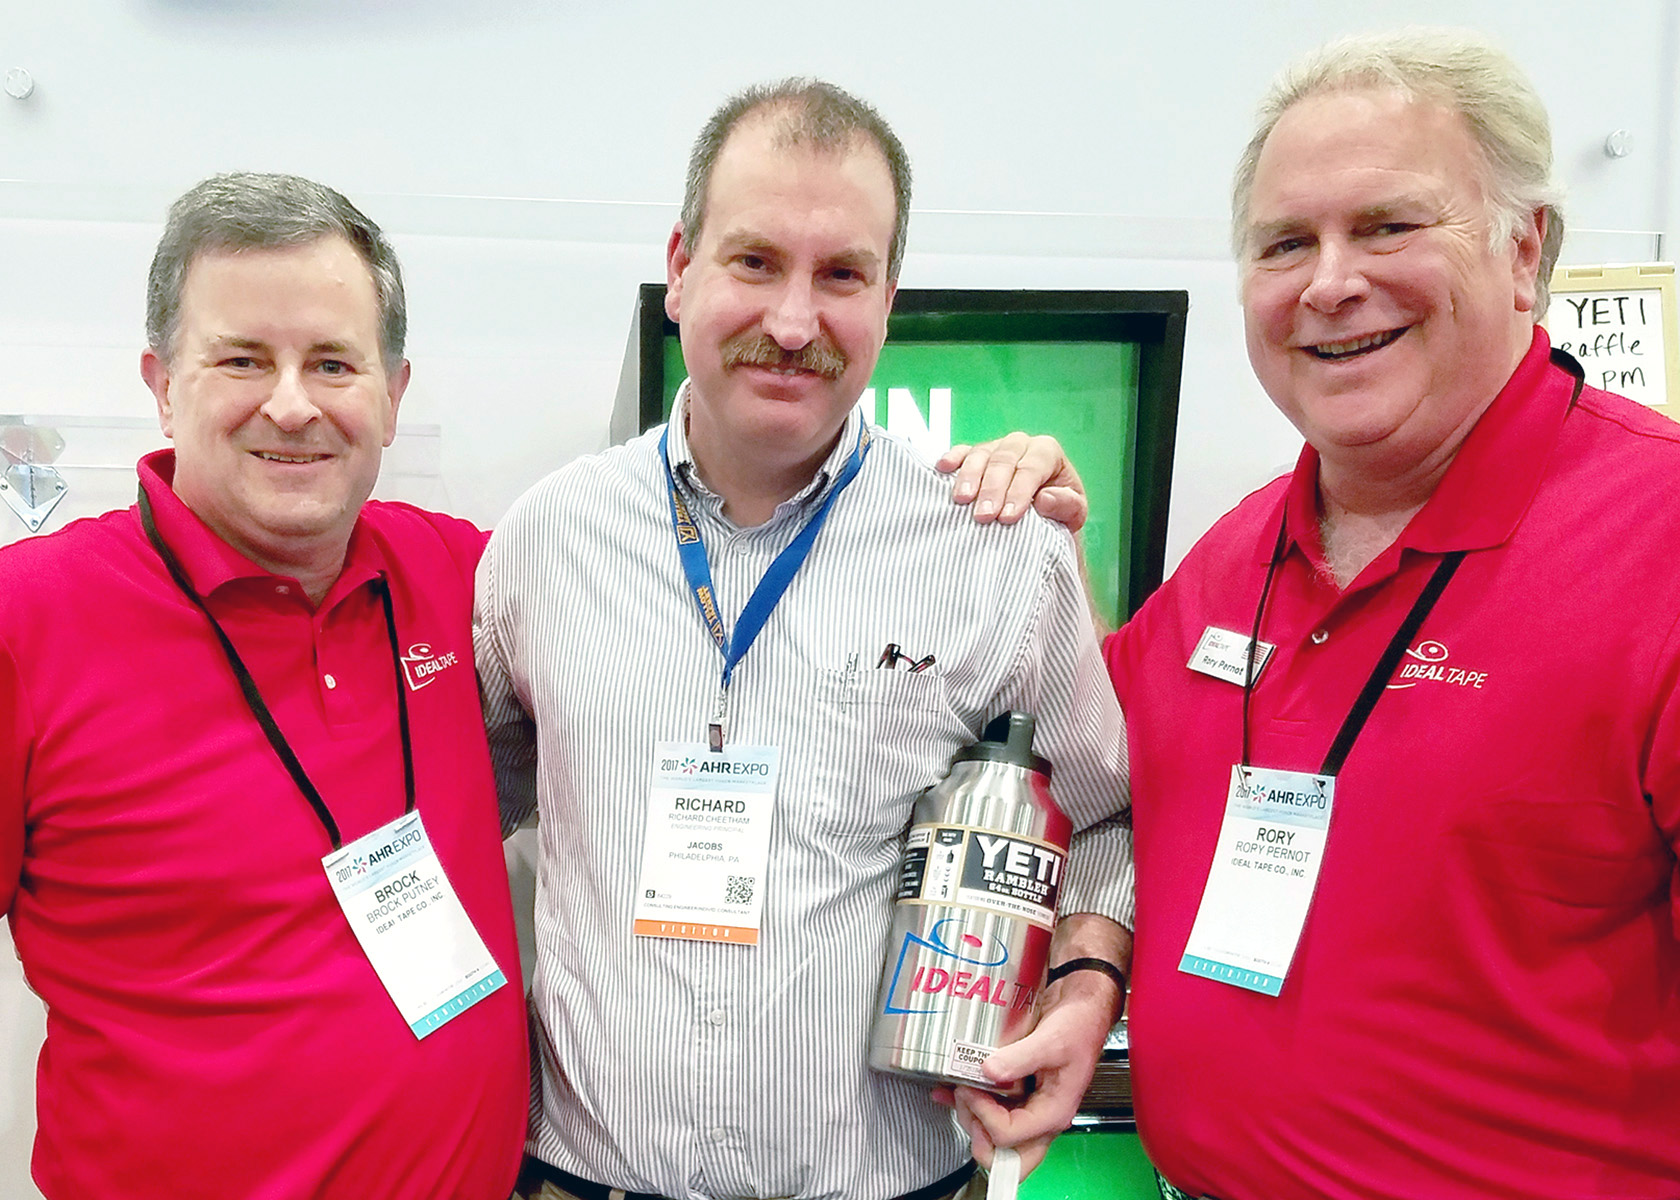 Richard Cheetham of Jacobs in Philadelphia, PA took home a YETI 64 oz, growler on Day 1 of the AHR Expo. (Pictured: Brock Putney, Richard Cheetham, Rory Pernot)